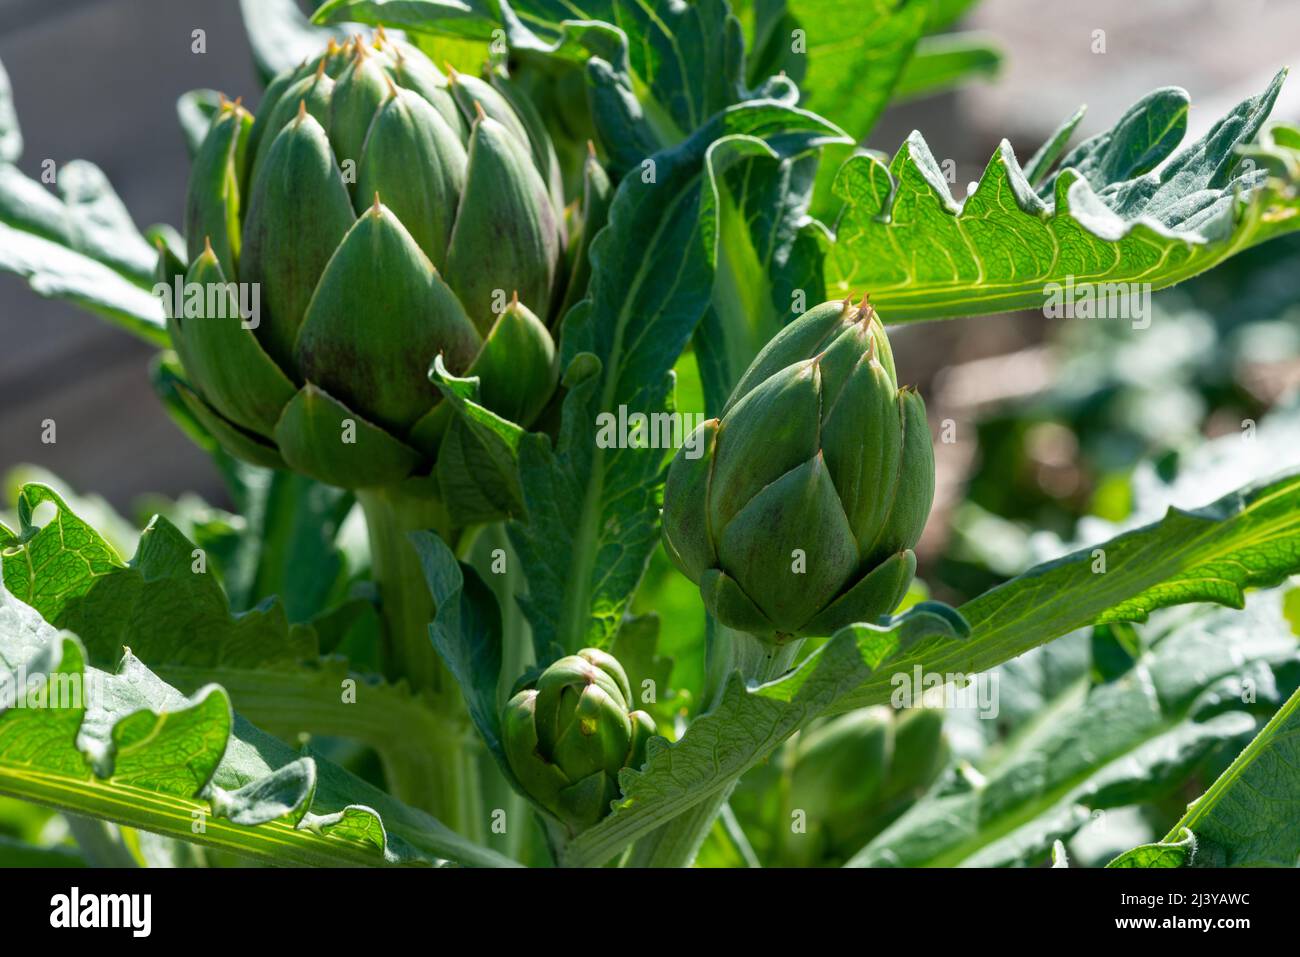 Closeup of multiple lush vibrant green waxy organic artichoke heads on leafy plant stems. The thick pointy leaves of the raw artichoke vegetables. Stock Photo